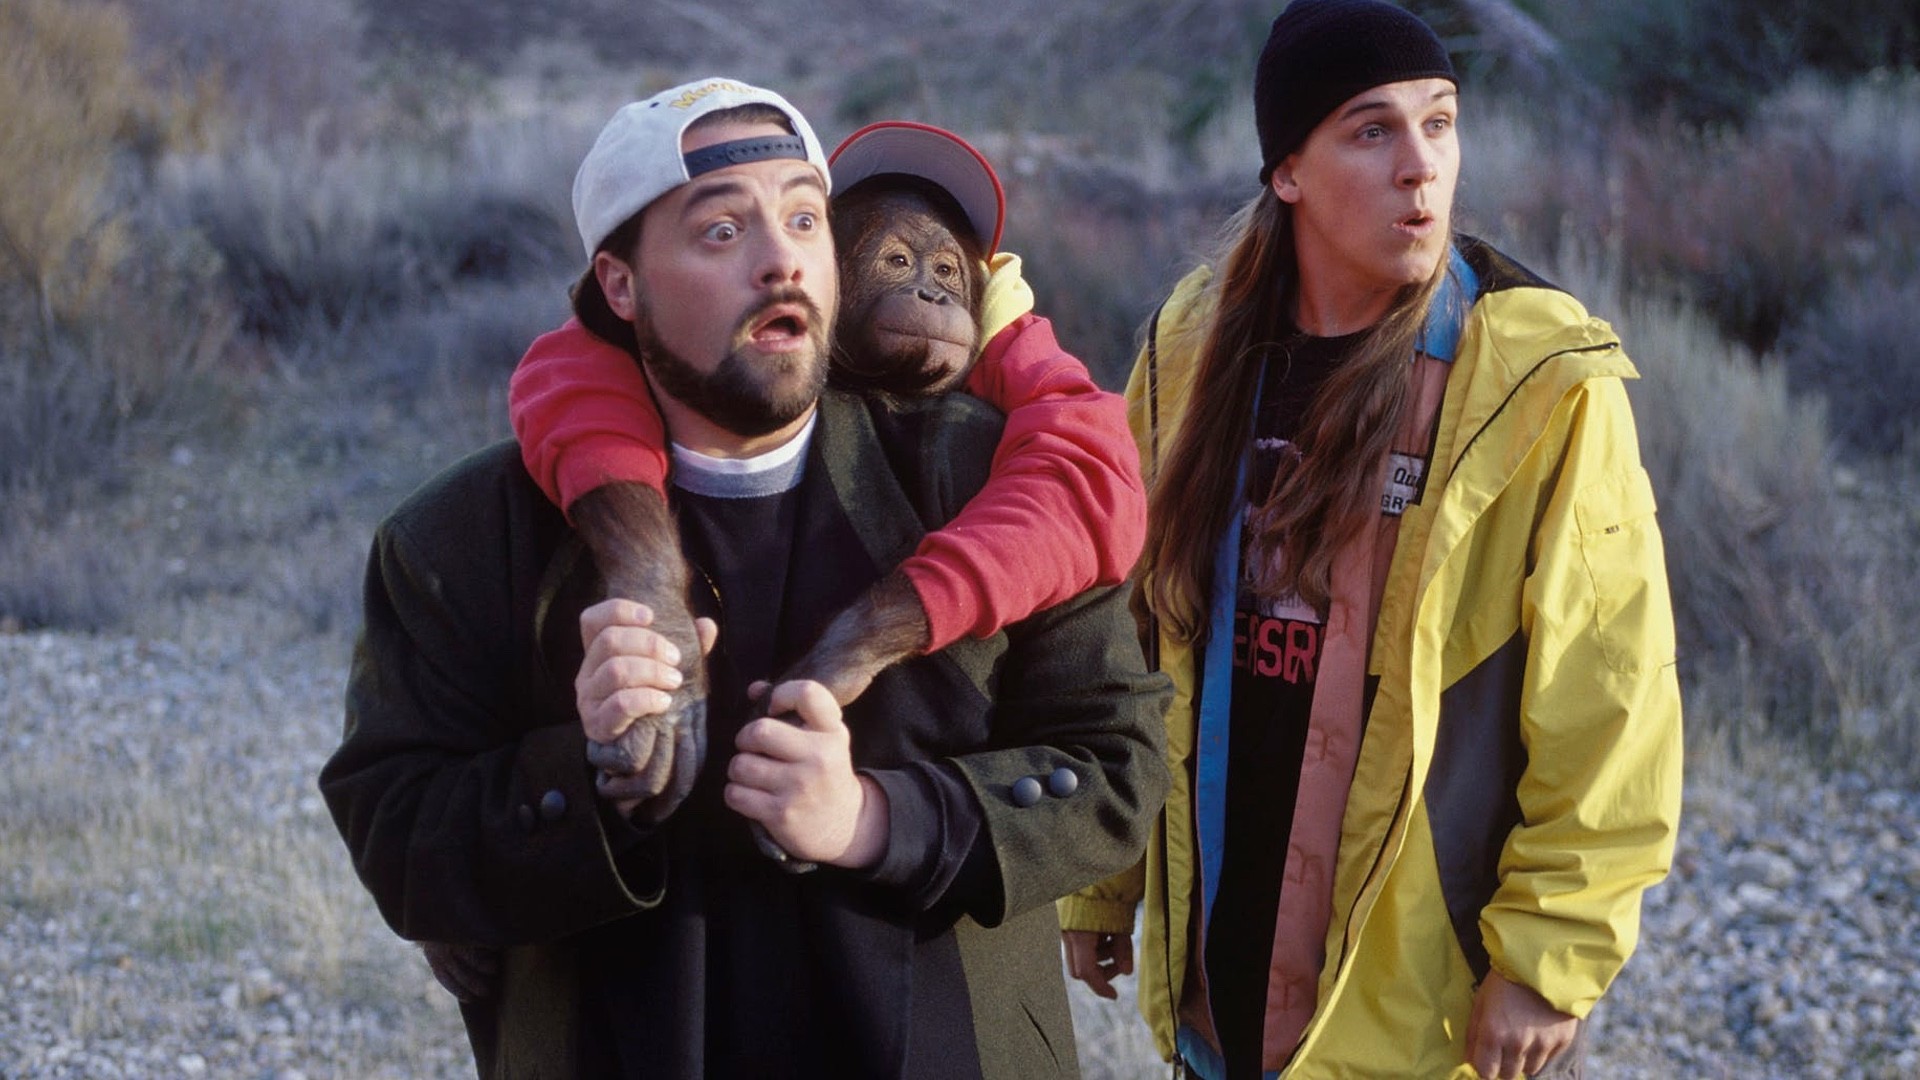 1920x1080 ... VR series through their immersive content division STXsurreal and it  has been revealed that one of those projects will include a Jay and Silent  Bob ...